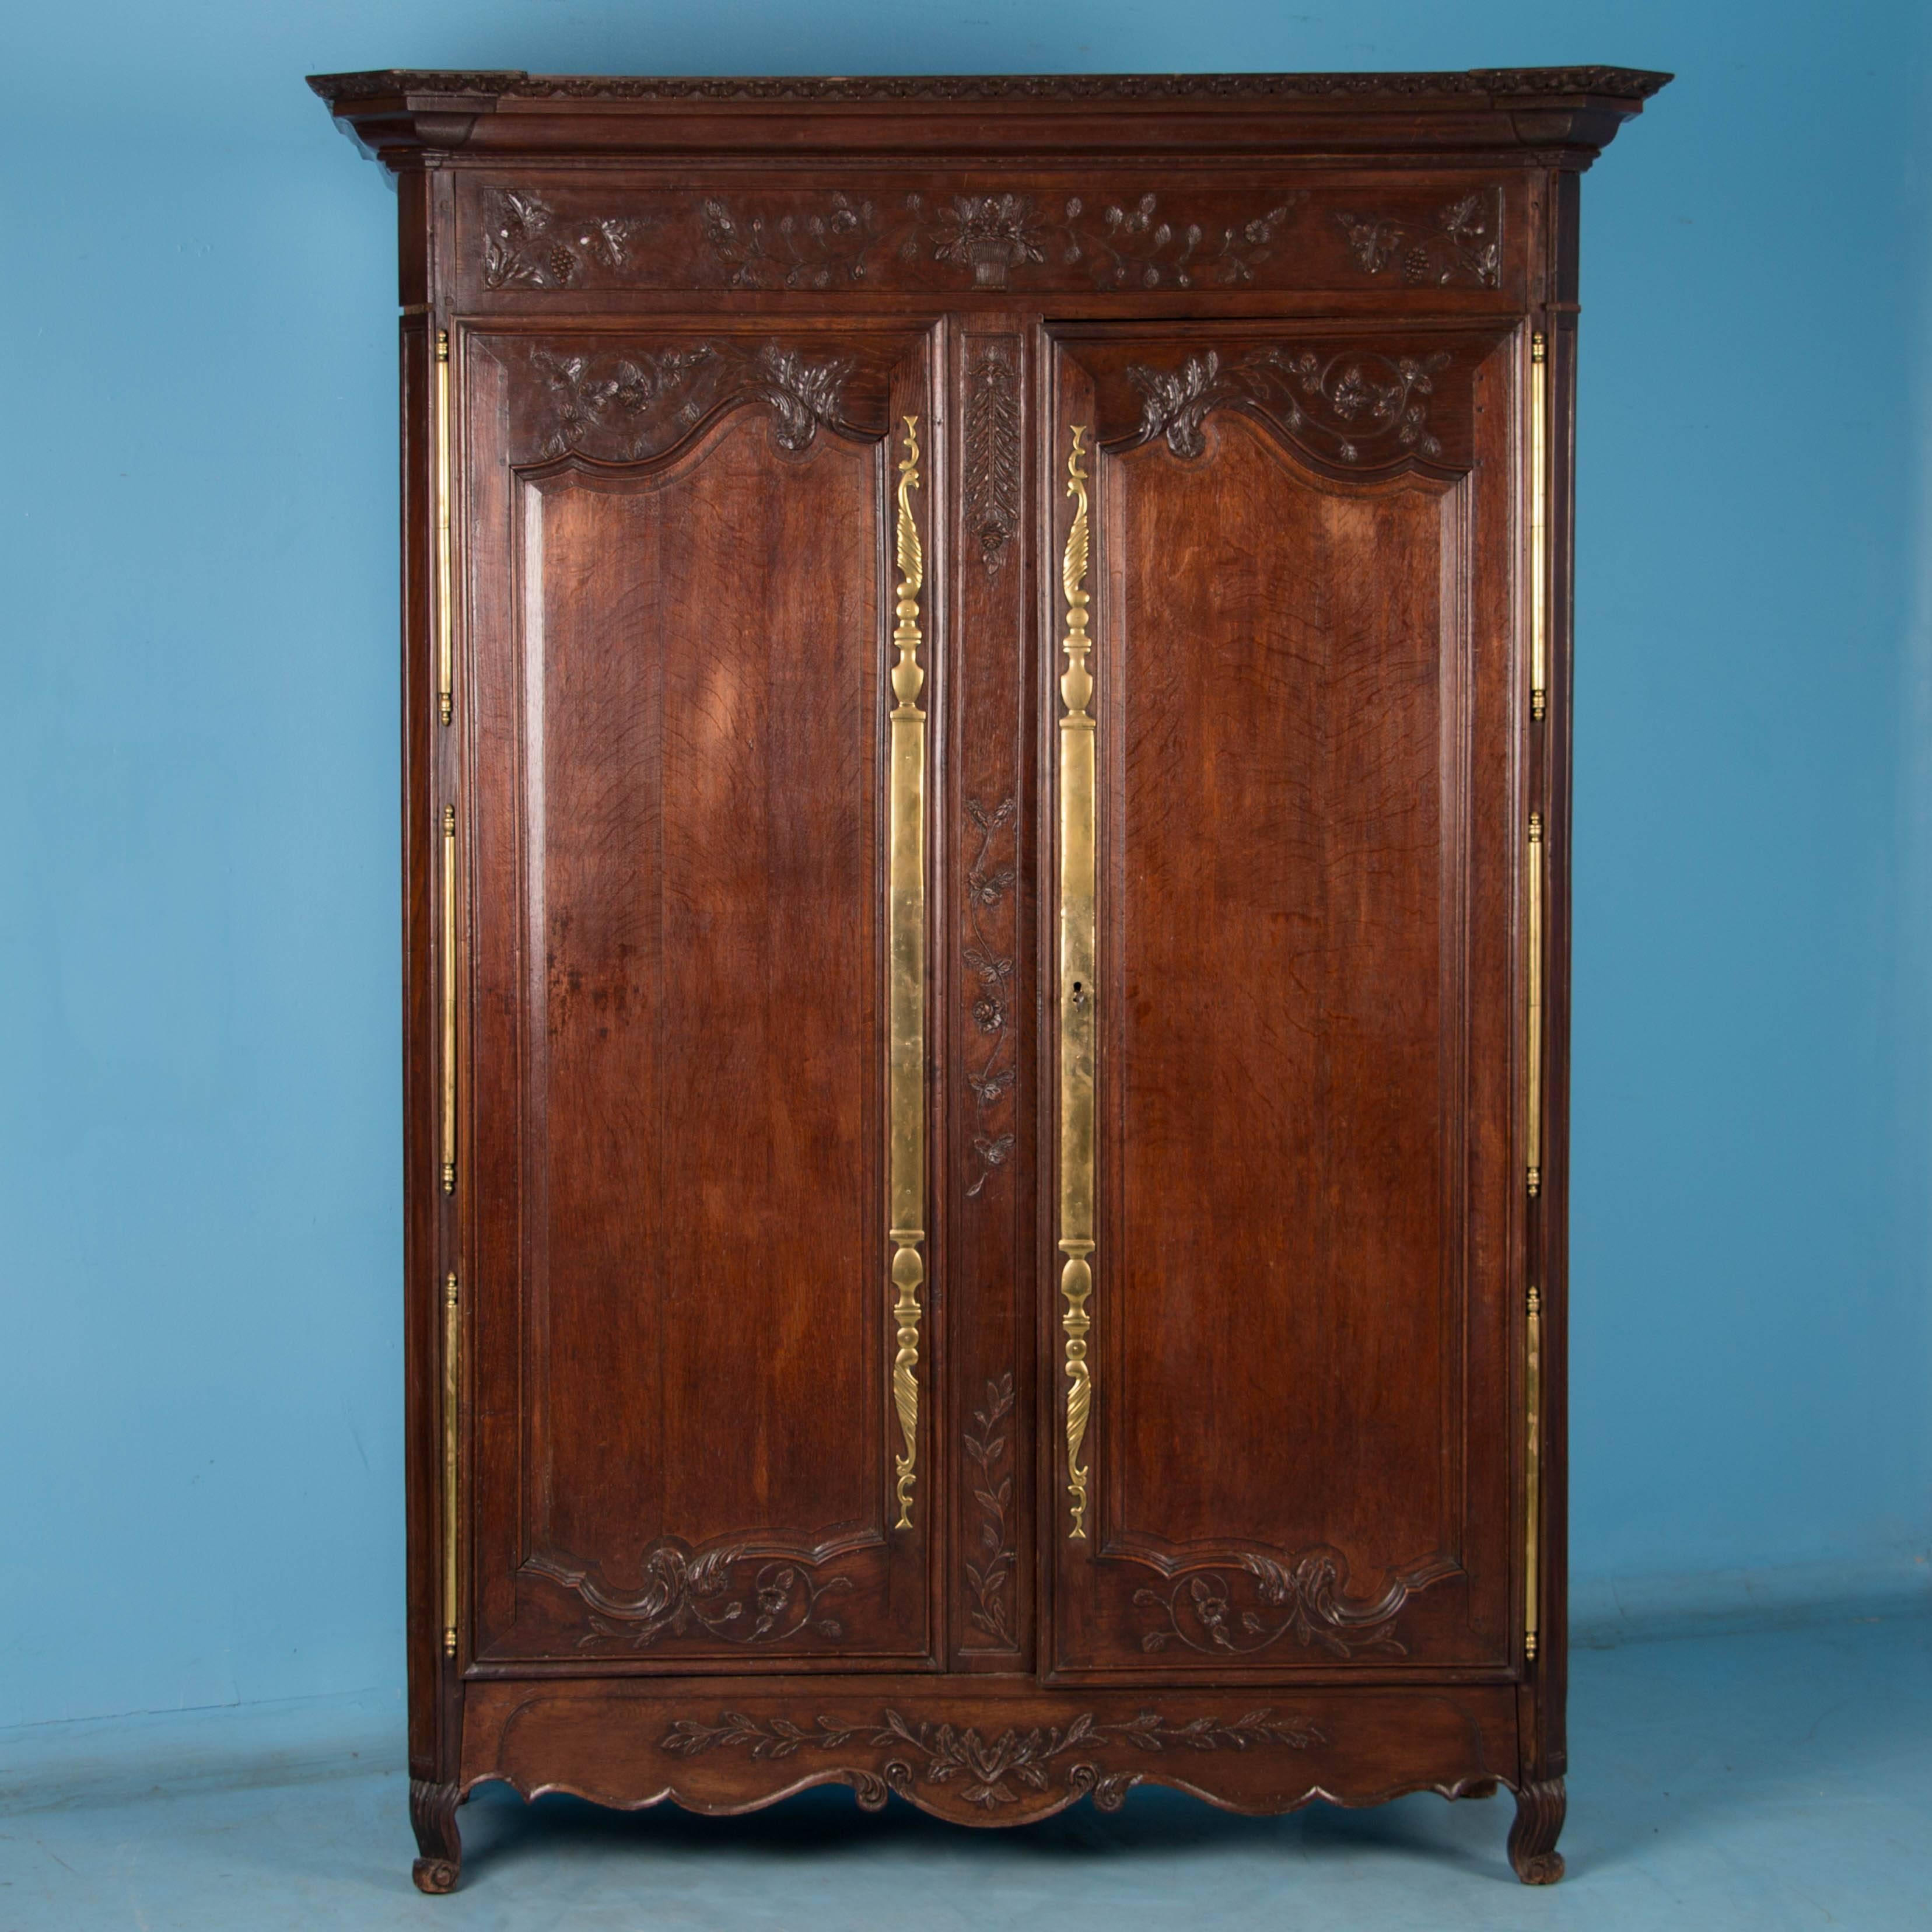  Attractive carvings of vines, leaves and flowers embellish this armoire giving it a romantic touch. Crafted in the late 18th century France, this oak armoire has beautifully carved moldings from the cornice to the door as well as the side panels.